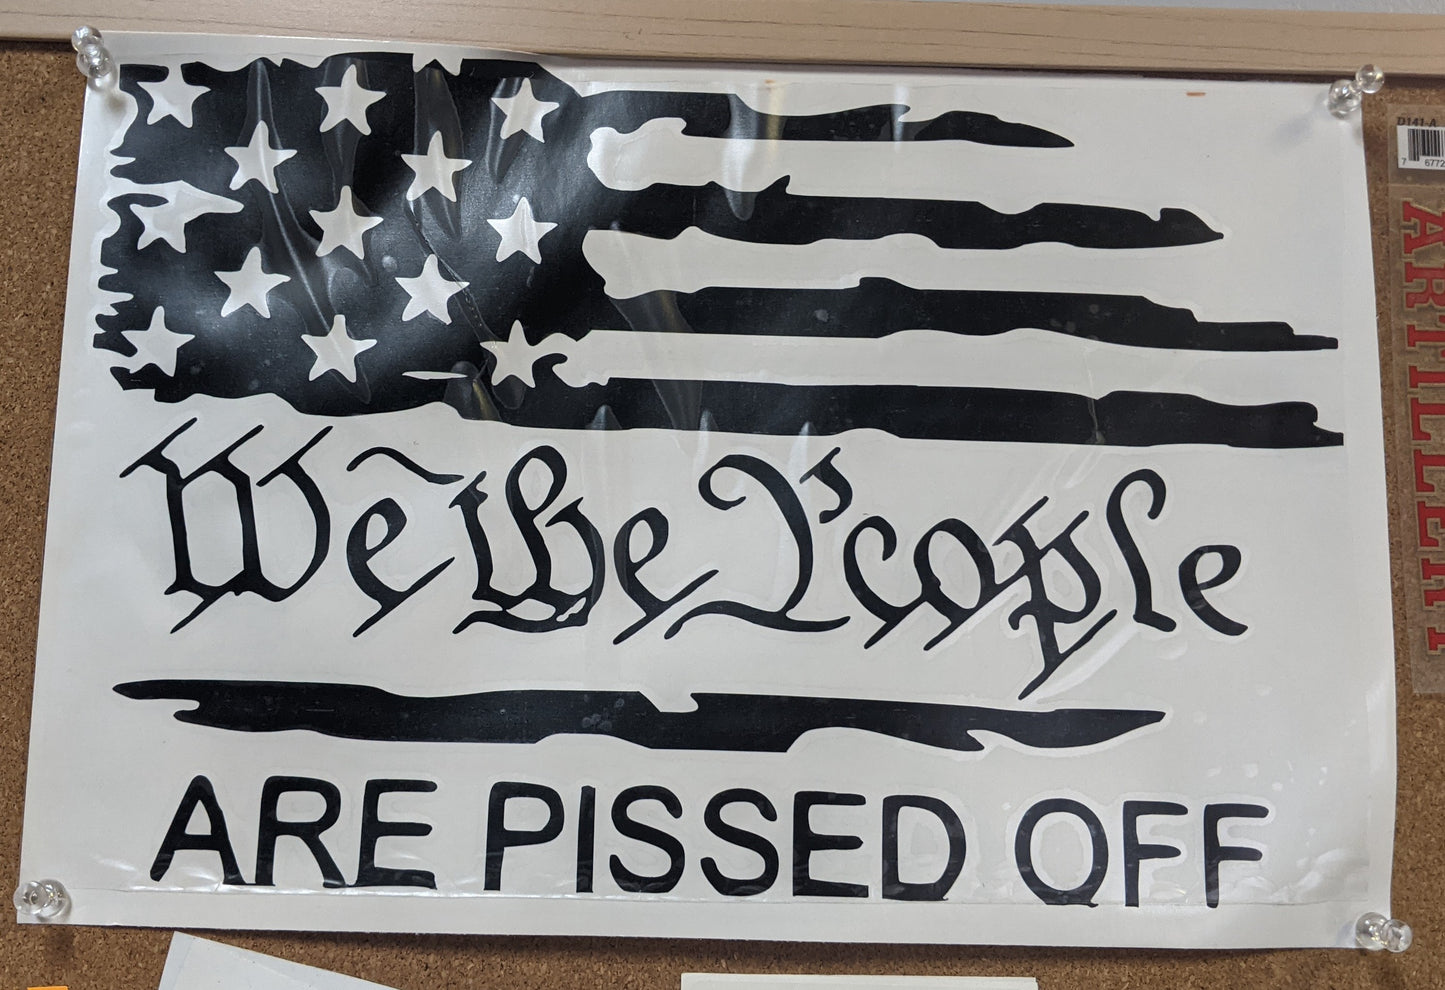 We the people are pissed off- large